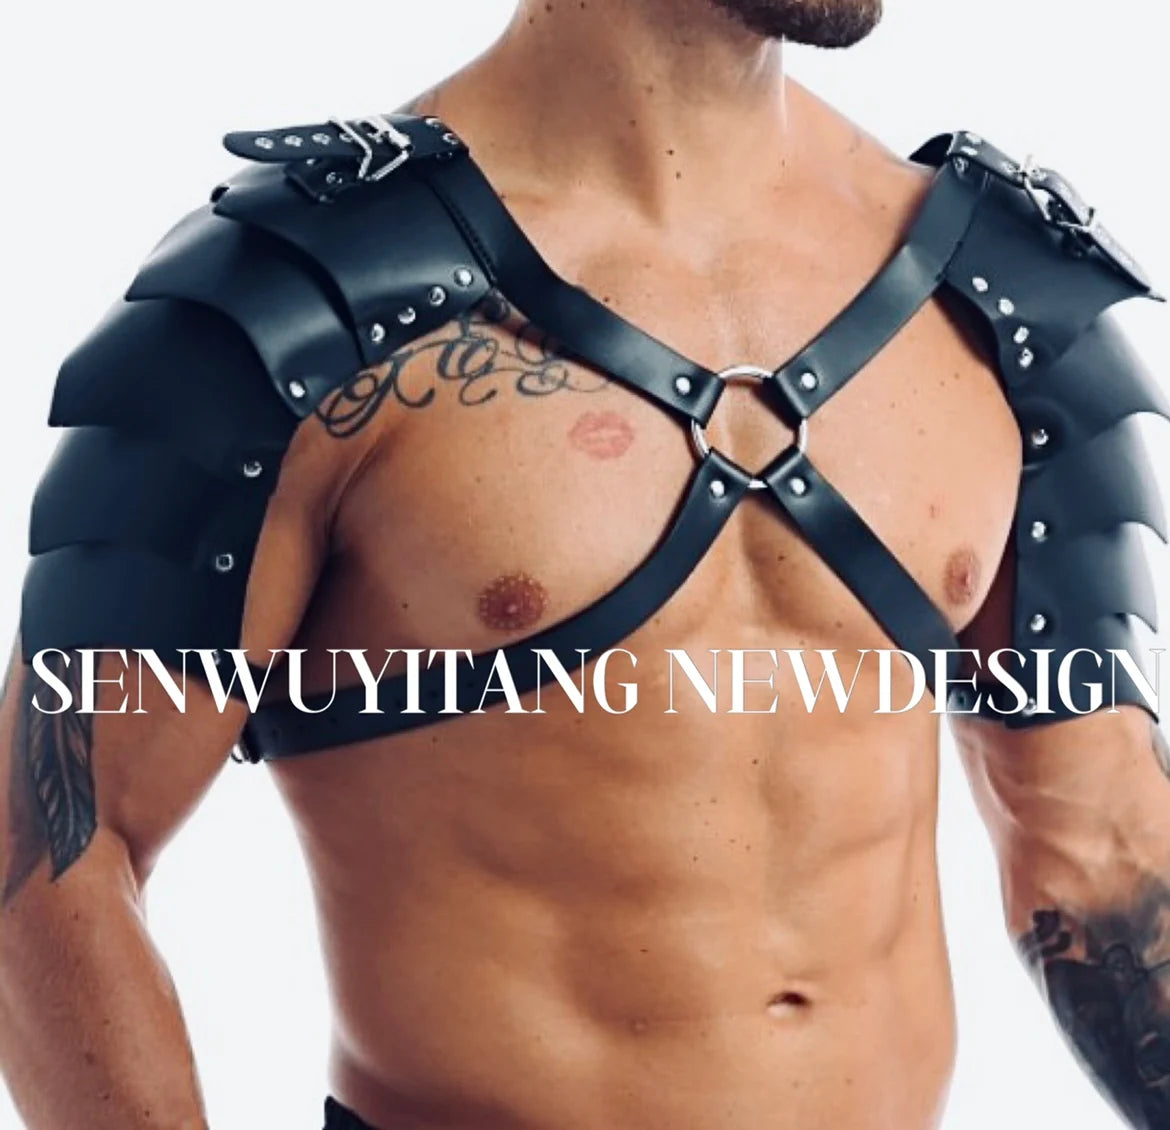 A shirtless individual wearing black leather shoulder armor with metal studs and straps, perfect for cosplay clothing. "Maramalive™ Nightclub Bar Male Singer Stage Dance Show Wear Costume DJ DS GOGO Sexy Leather Waistcoat Party Theme Performance Dress" text overlaying the image.